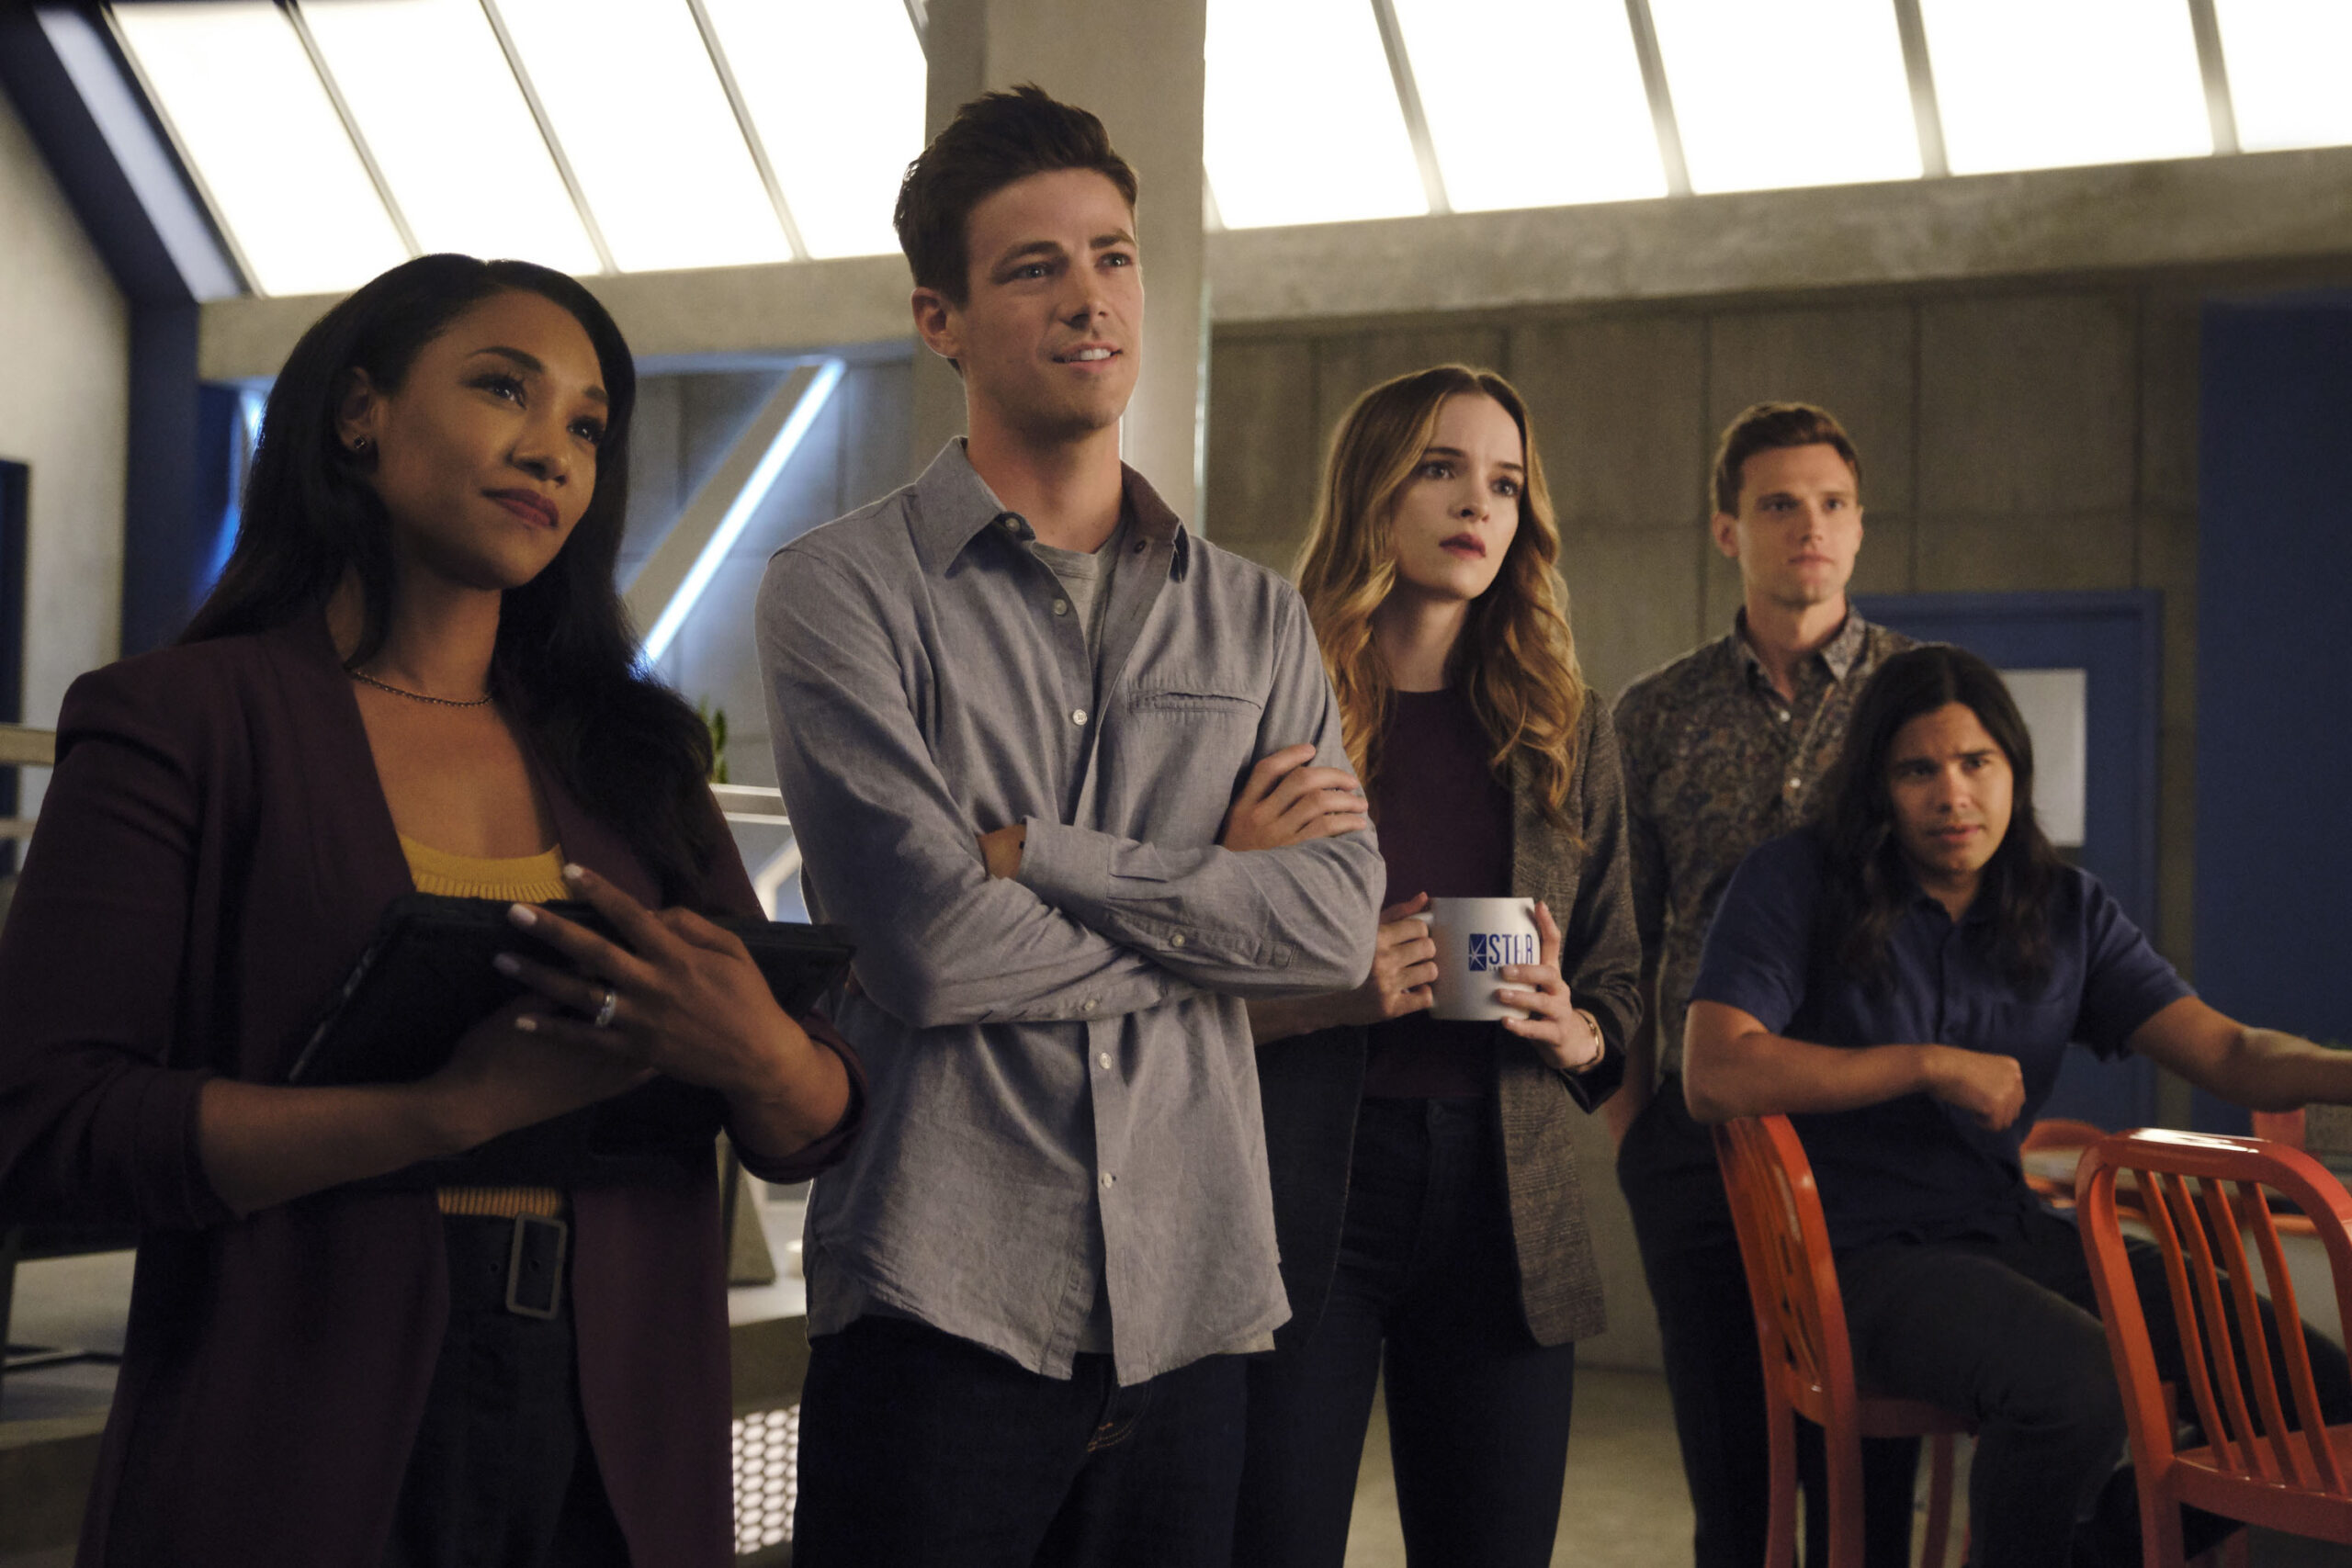 (S-D) Candice Patton come Iris West - Allen, Grant Gustin come Barry Allen, Danielle Panabaker come Caitlin Snow, Hartley Sawyer come Dibney e Carlos Valdes come Cisco Ramon in The Flash 6x01 'Into The Void' [credit: foto di Jeff Weddell/The CW; Copyright 2019 The CW Network, LLC. All rights reserved; courtesy of Mediaset]